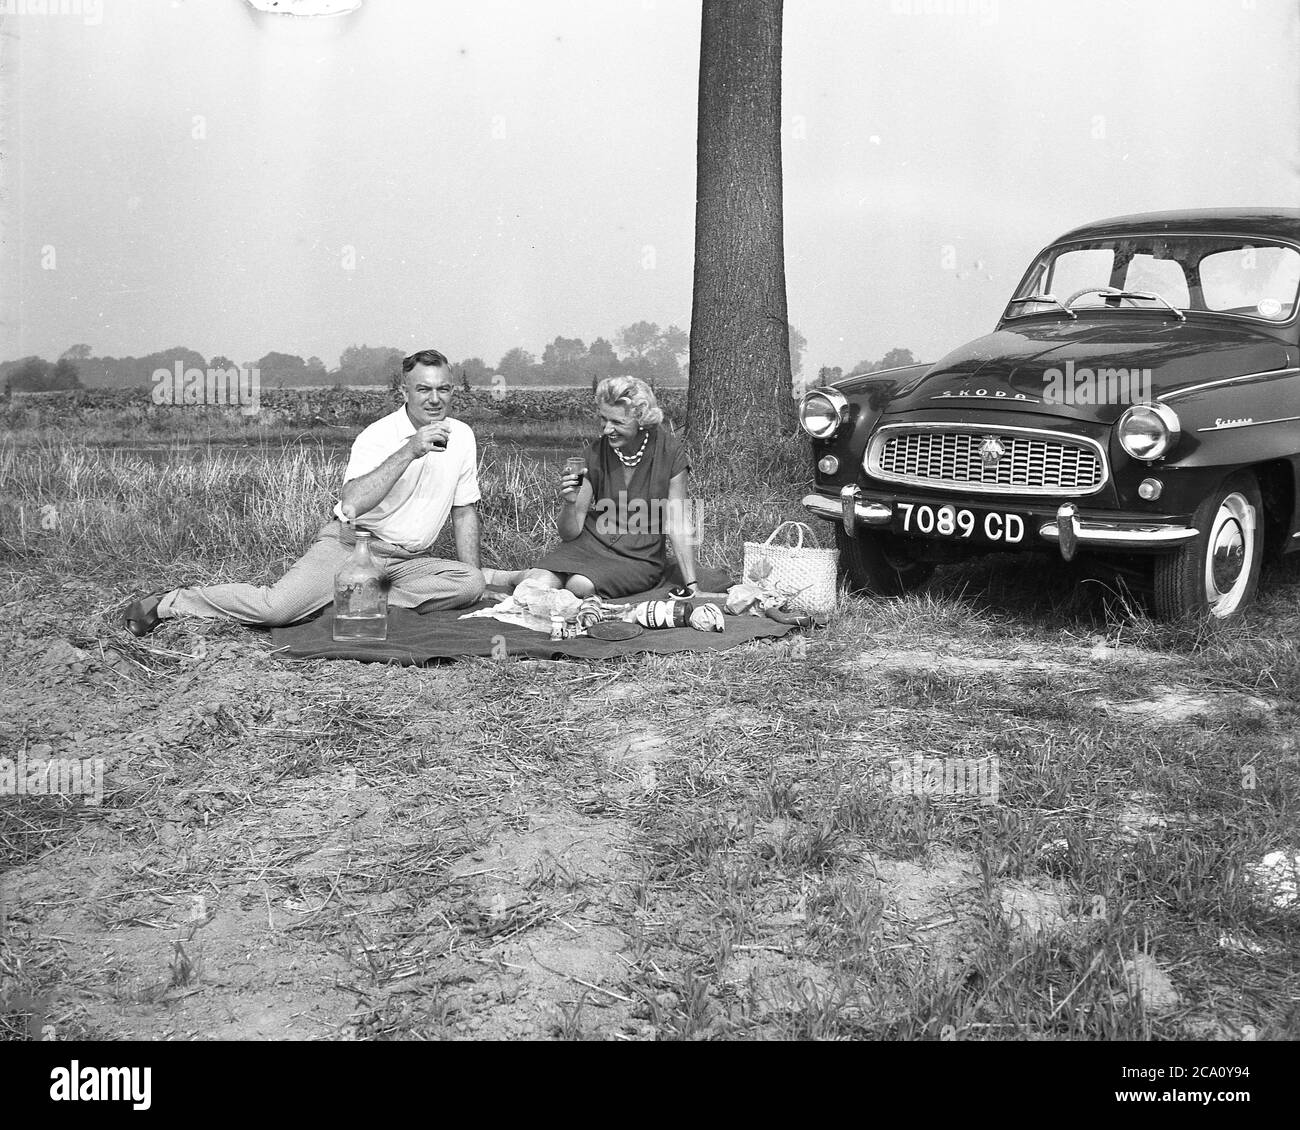 1960, historical, a British couple motoring around France. Sitting together on a blanket enjoying a tumbler of French wine red and a roadside picnic beside their Skoda Octavia car, a small family car of the era made by Czechoslovakian car producer AZNP at Mlada Boleslav from 1969 to 1971. It was named Octavia as it was the eighth car produced by the Czech car maker Skoda Auto. Stock Photo